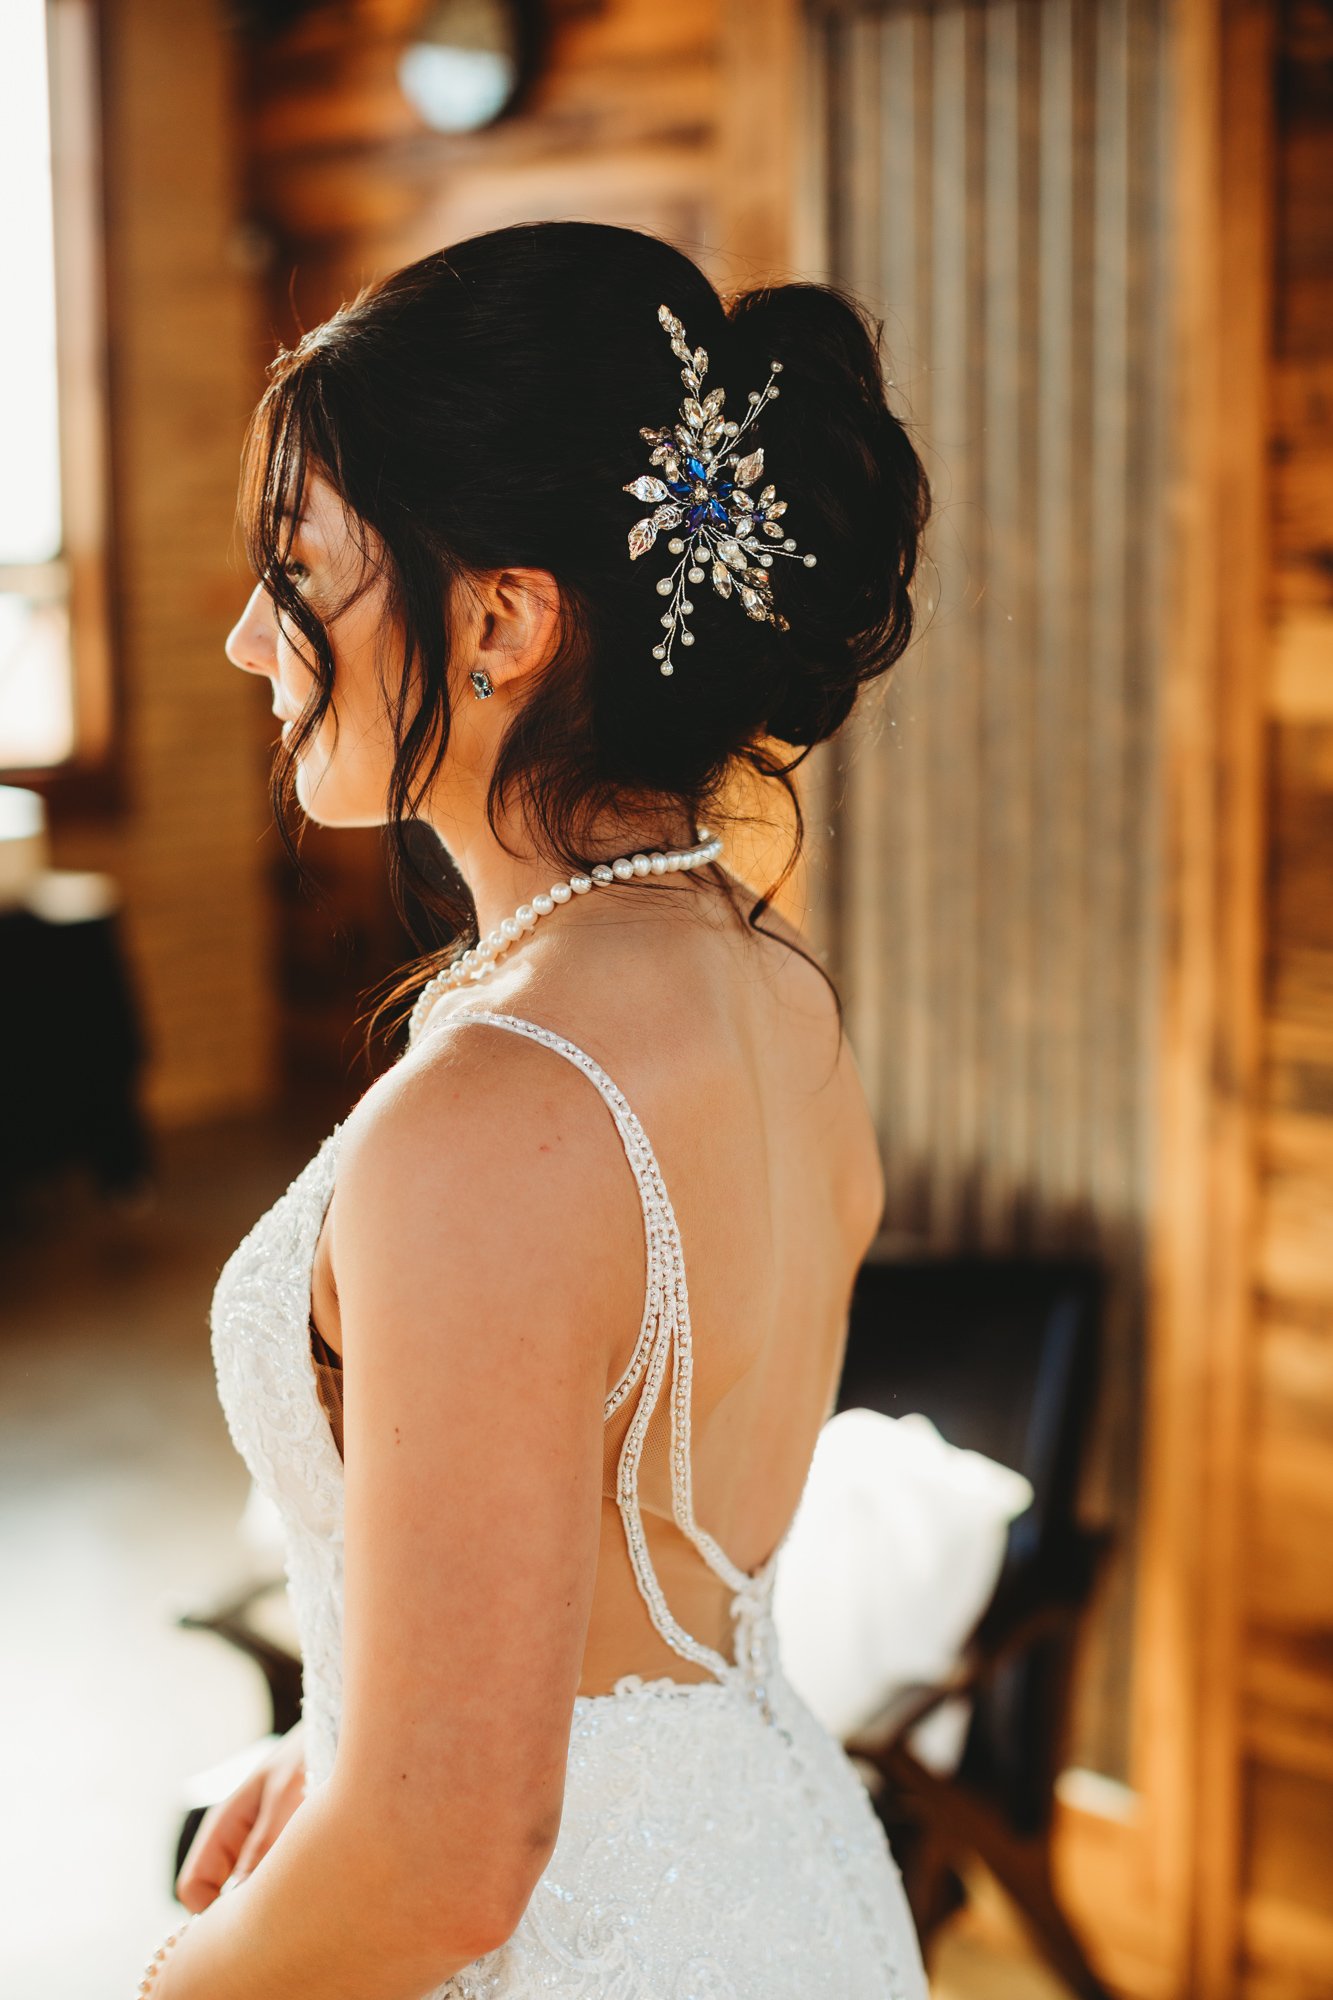  In Illinois, a bride is captured on her wedding day looking radiant by Teala Ward Photography. bridal portraits #TealaWardPhotography #TealaWardWeddings #WeddingLocationsIllinois #IllinoisWedding #weddingdetails #weddingphotography #married 